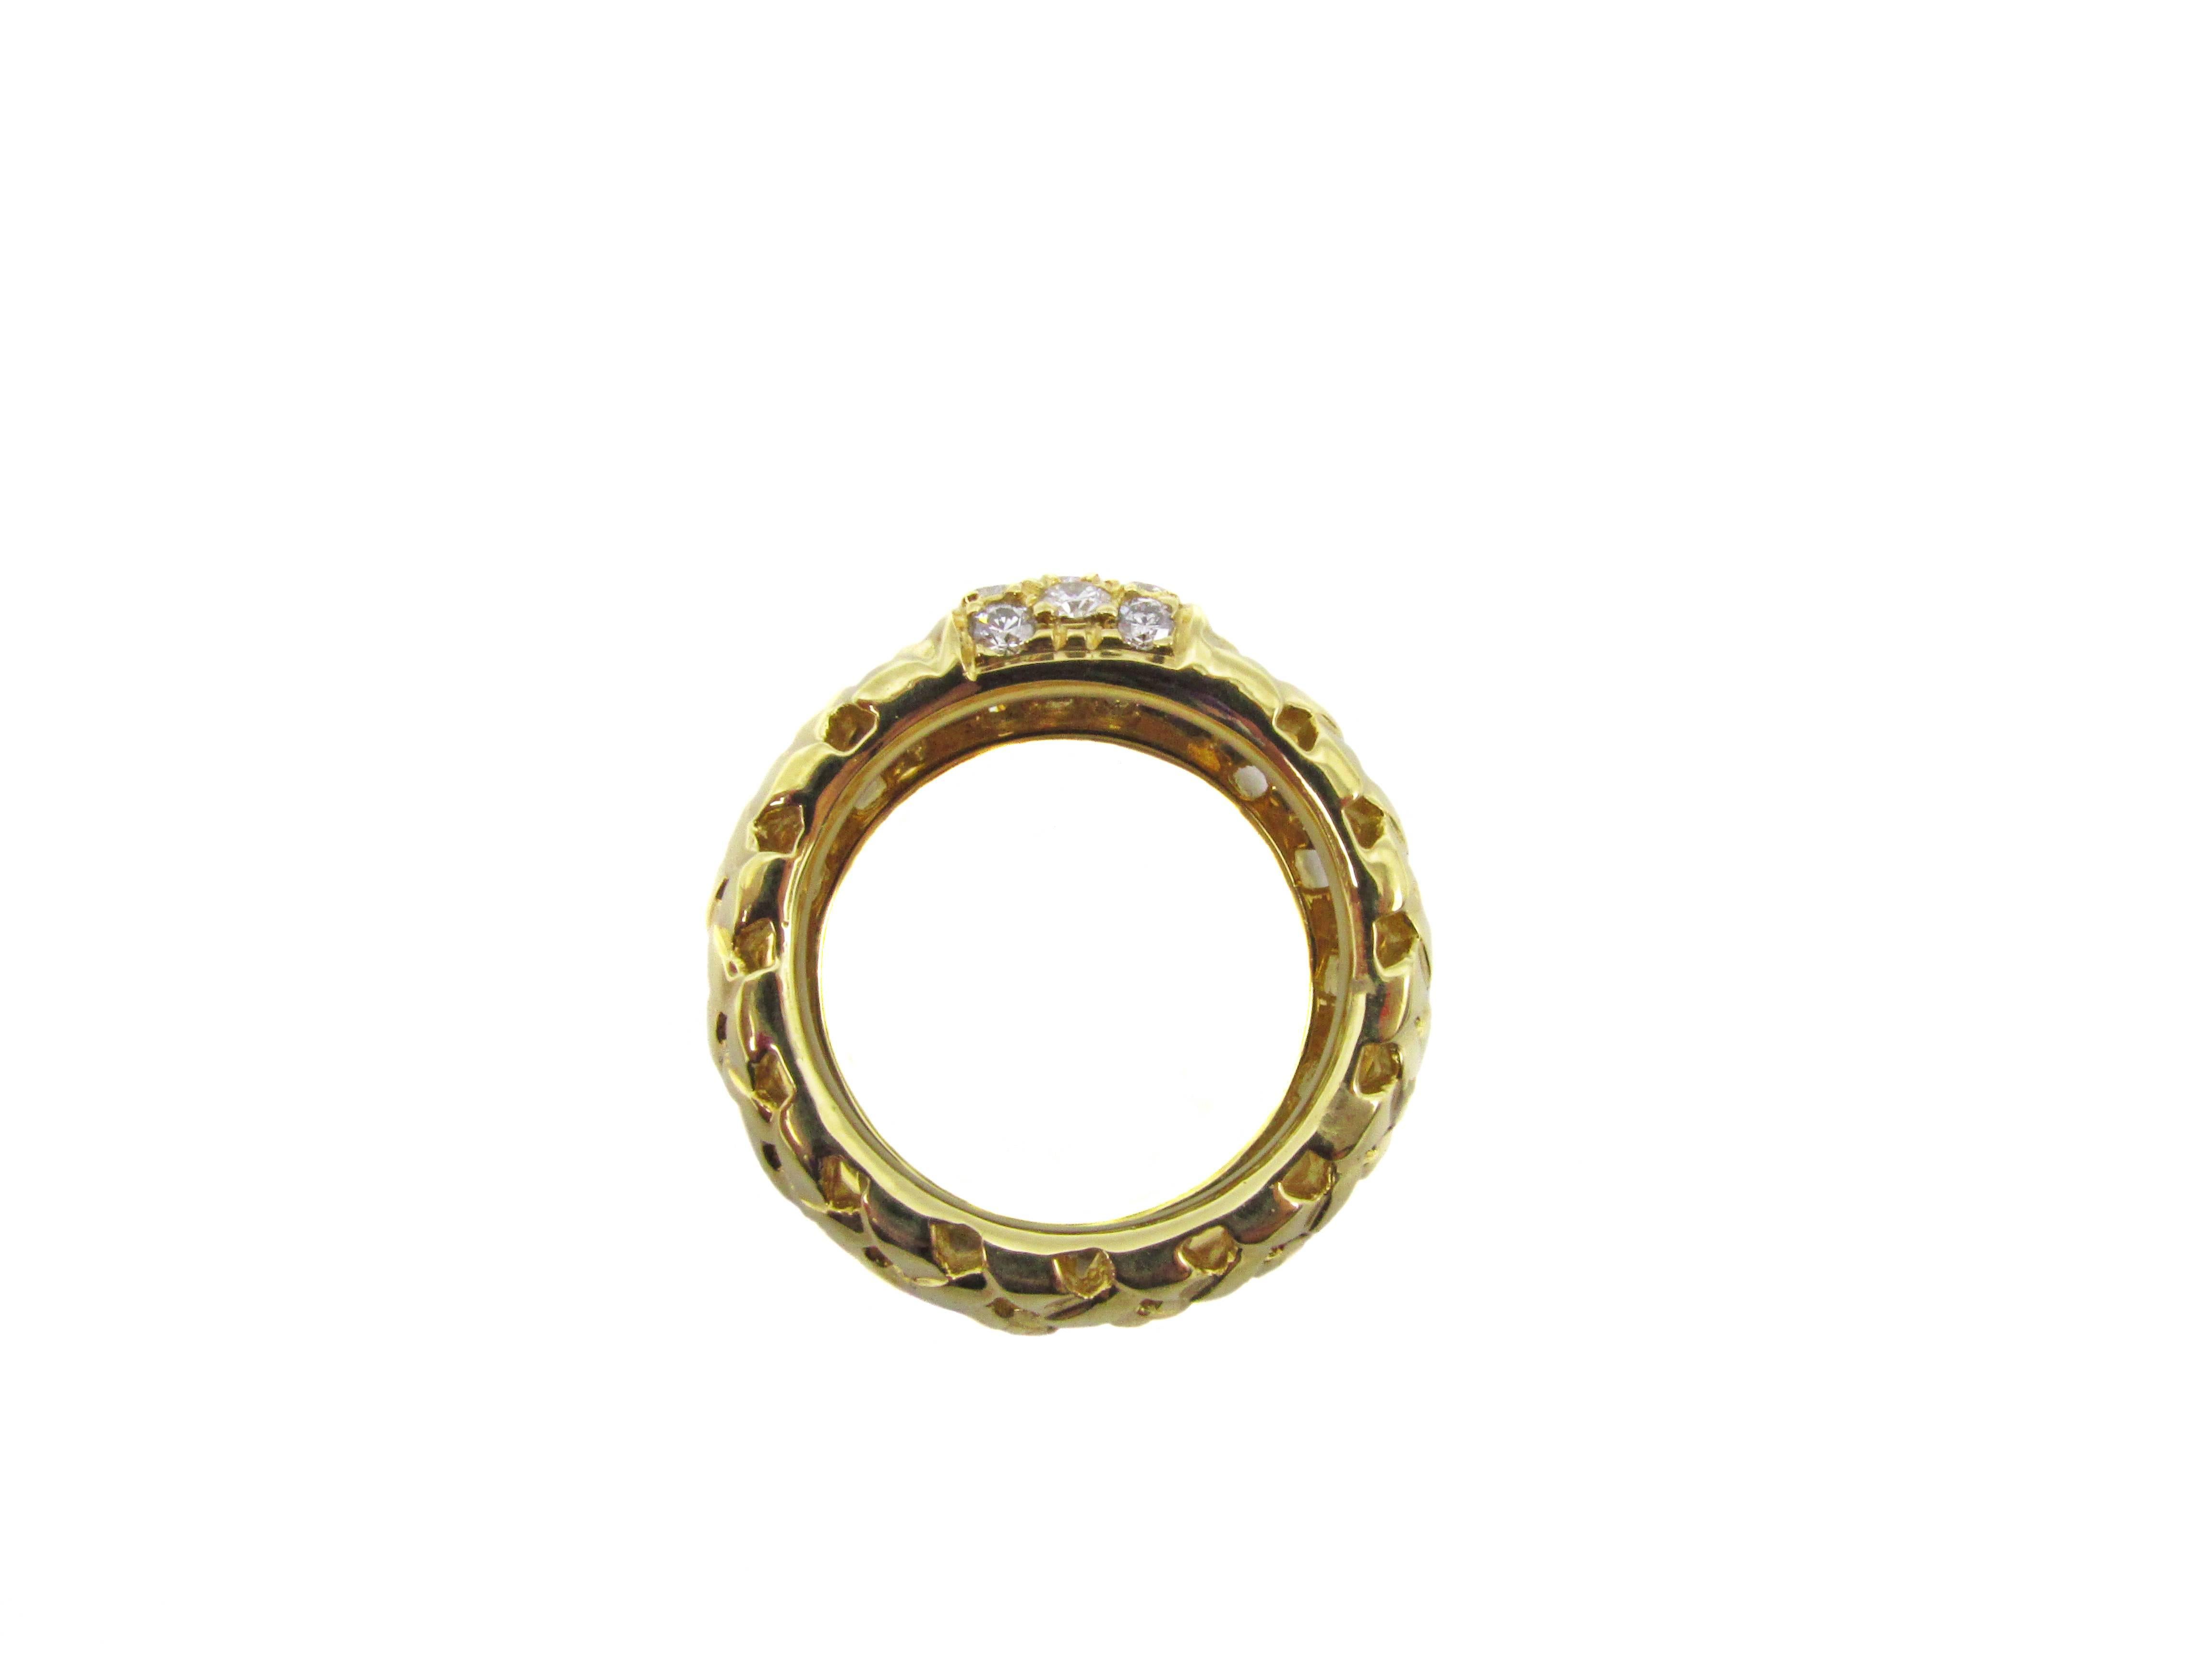 Chic 18 karat yellow gold and diamond band by Tiffany and Co. from the 1995 Vannerie collection. Finely hand crafted polished bands of gold are fashioned in a woven motive giving this band a light and airy look. On the top of the band , a plaque set